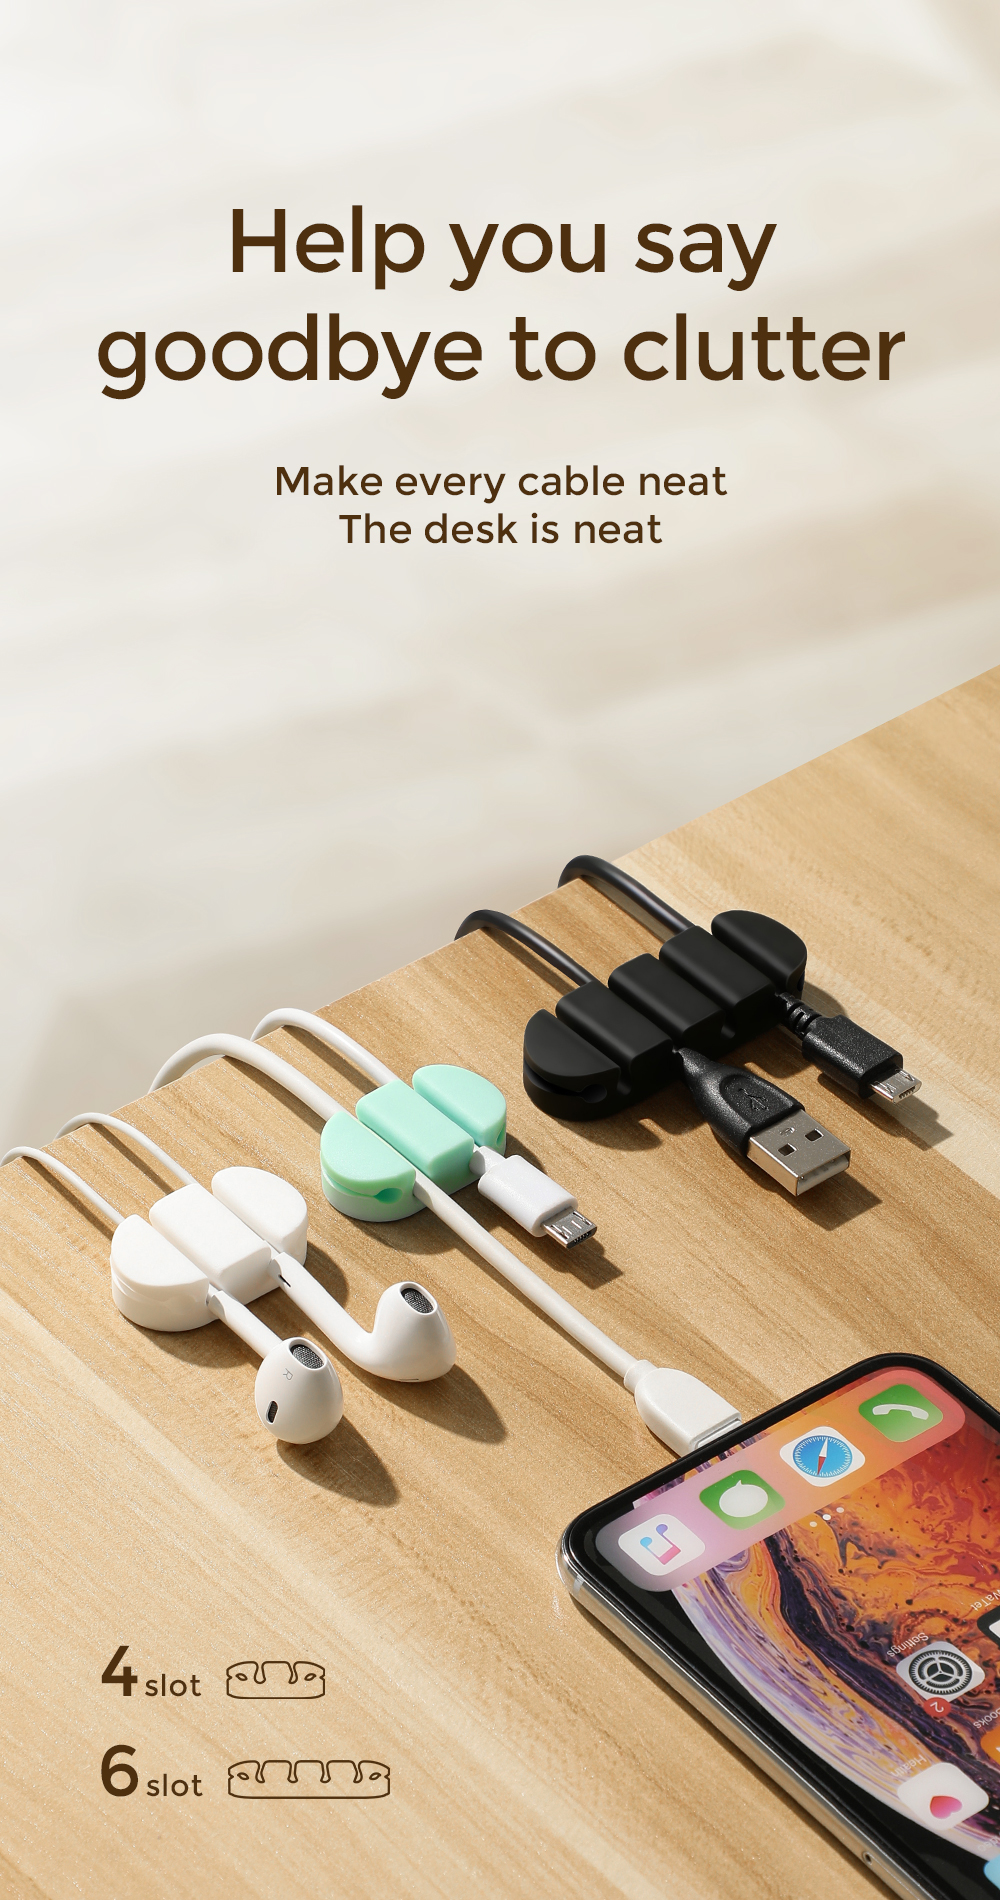 Cables-Cable-Clips-Cord-Organizer-Cord-Holder-4-Pack-Cable-Management-Desk-Cable-Cord-Organizer-for-Home-Office-Charger-Power-Cord-Computer-Car-Chord-Bedsi-6